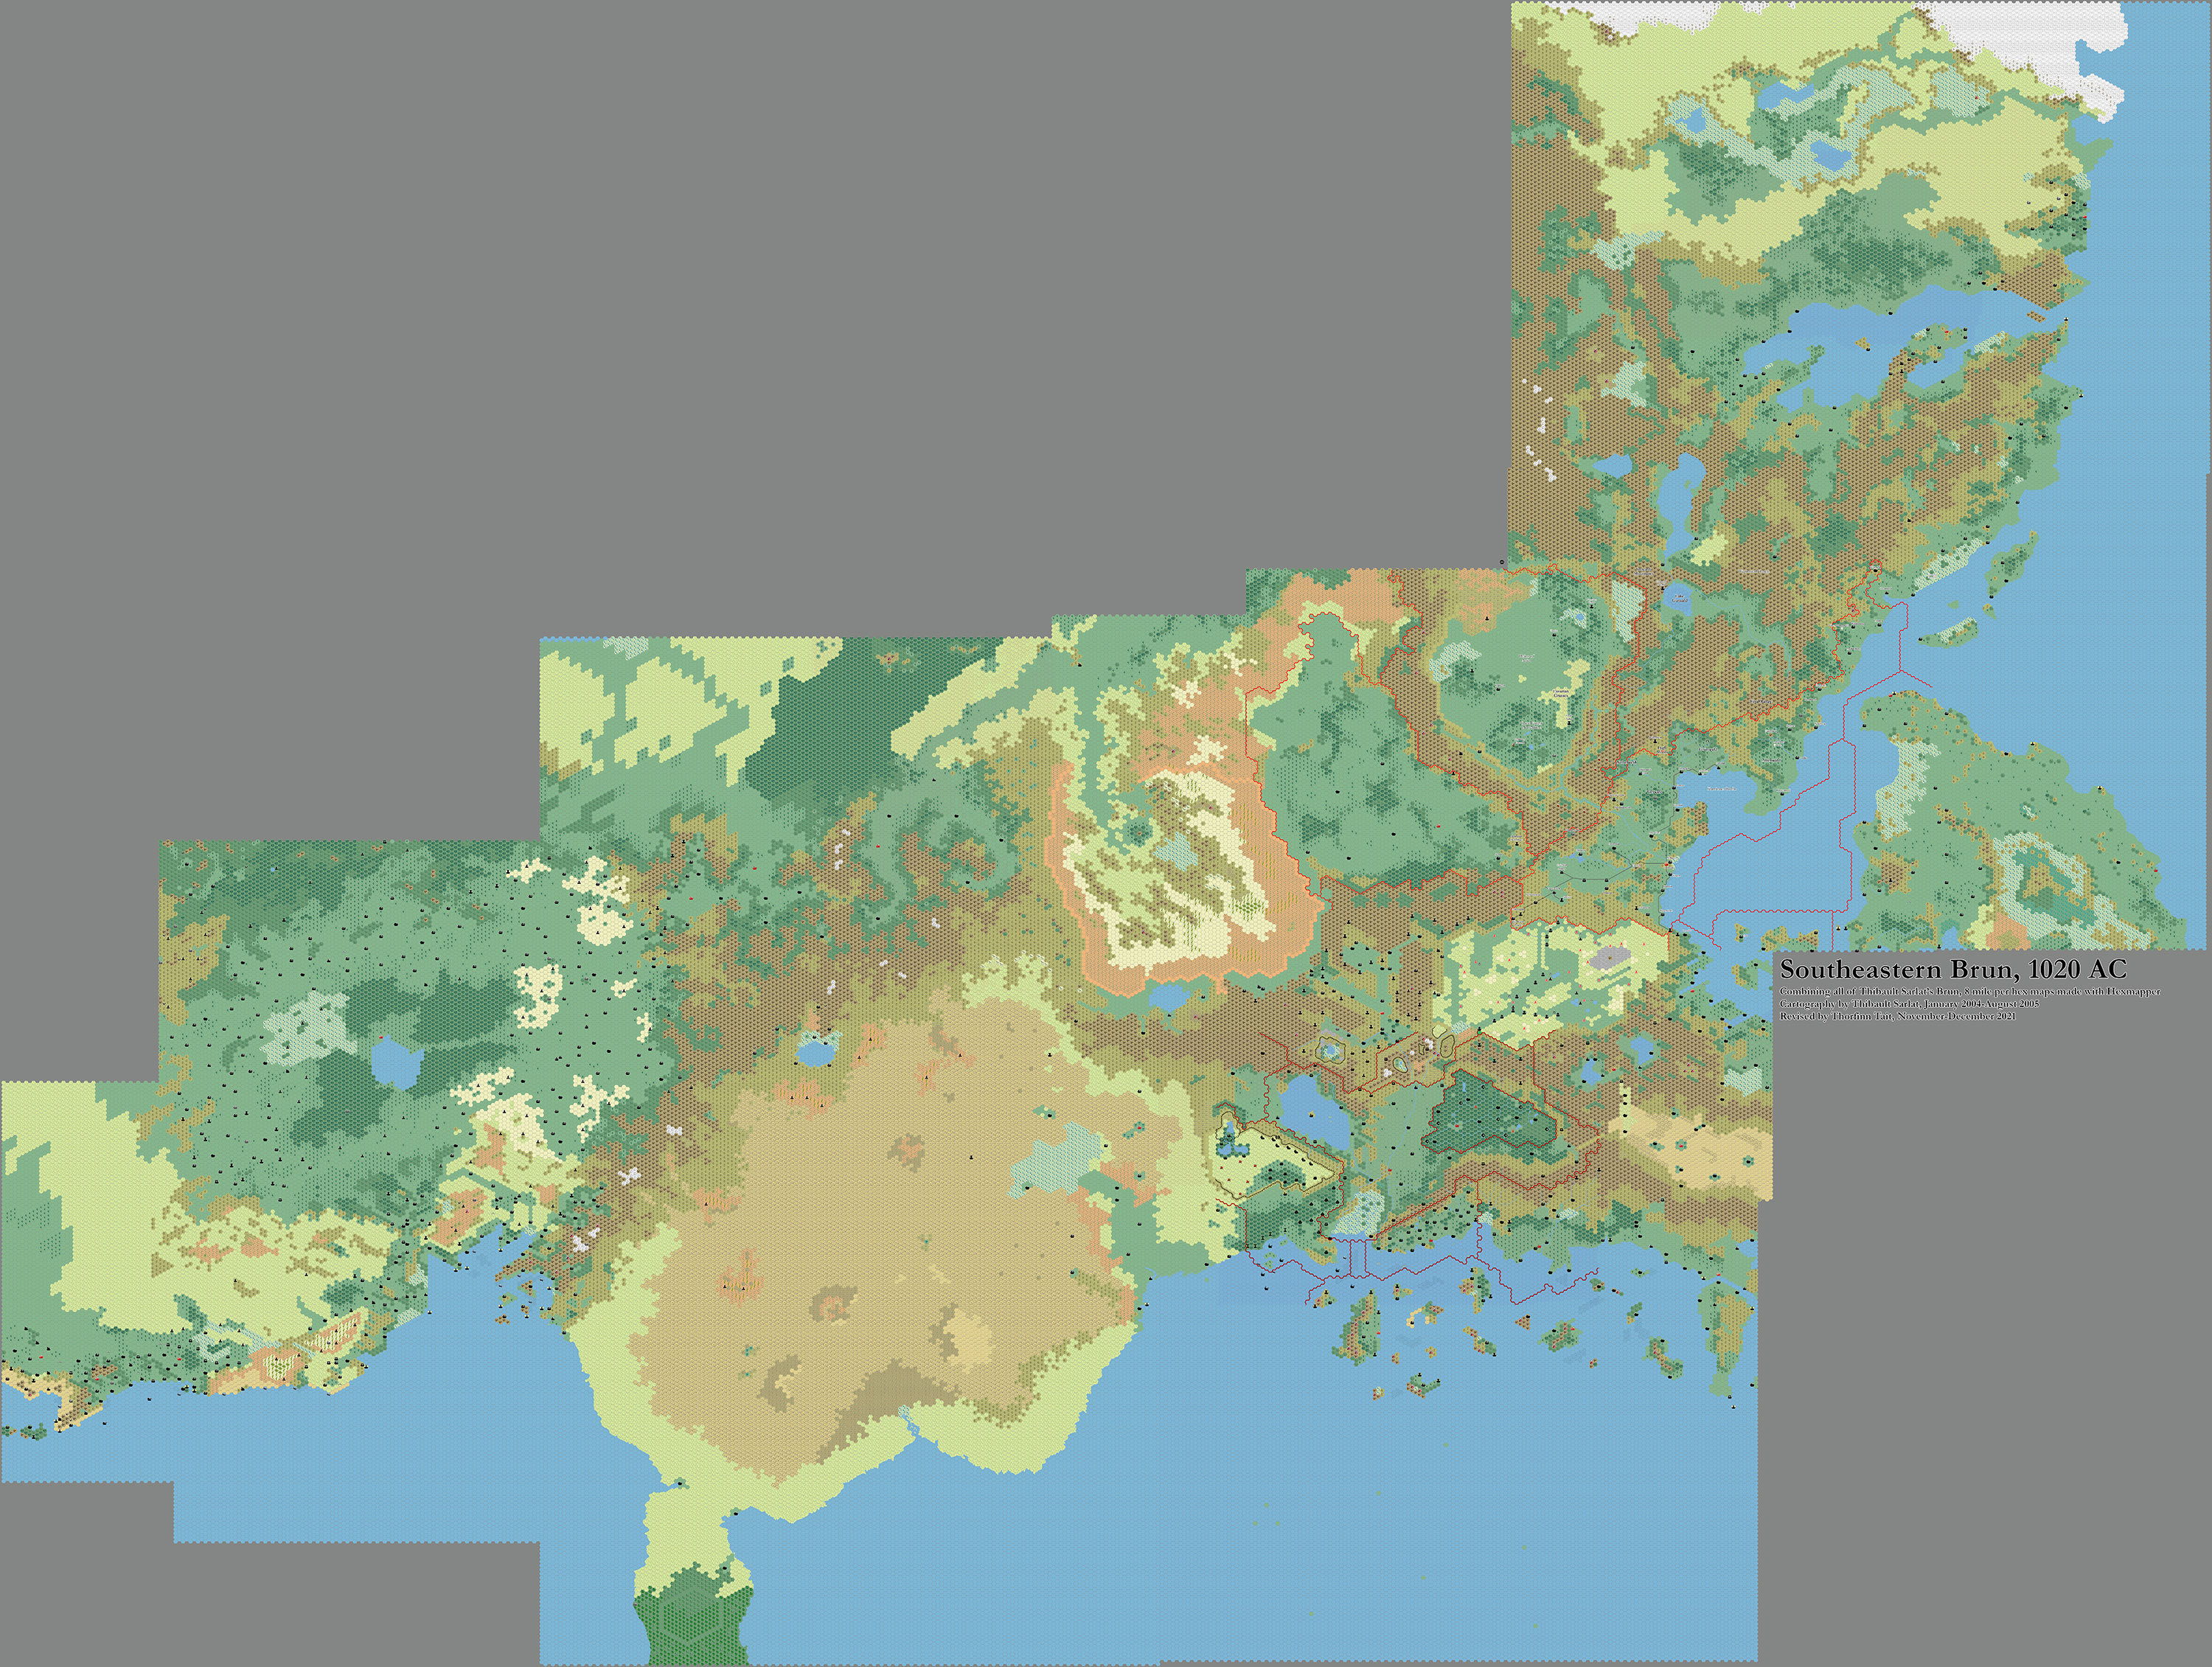 Combined work-in-progress map of Southeastern Brun, 8 miles per hex by Thibault Sarlat, January 2004 -August 2005; assembled by Thorfinn Tait, December 2021